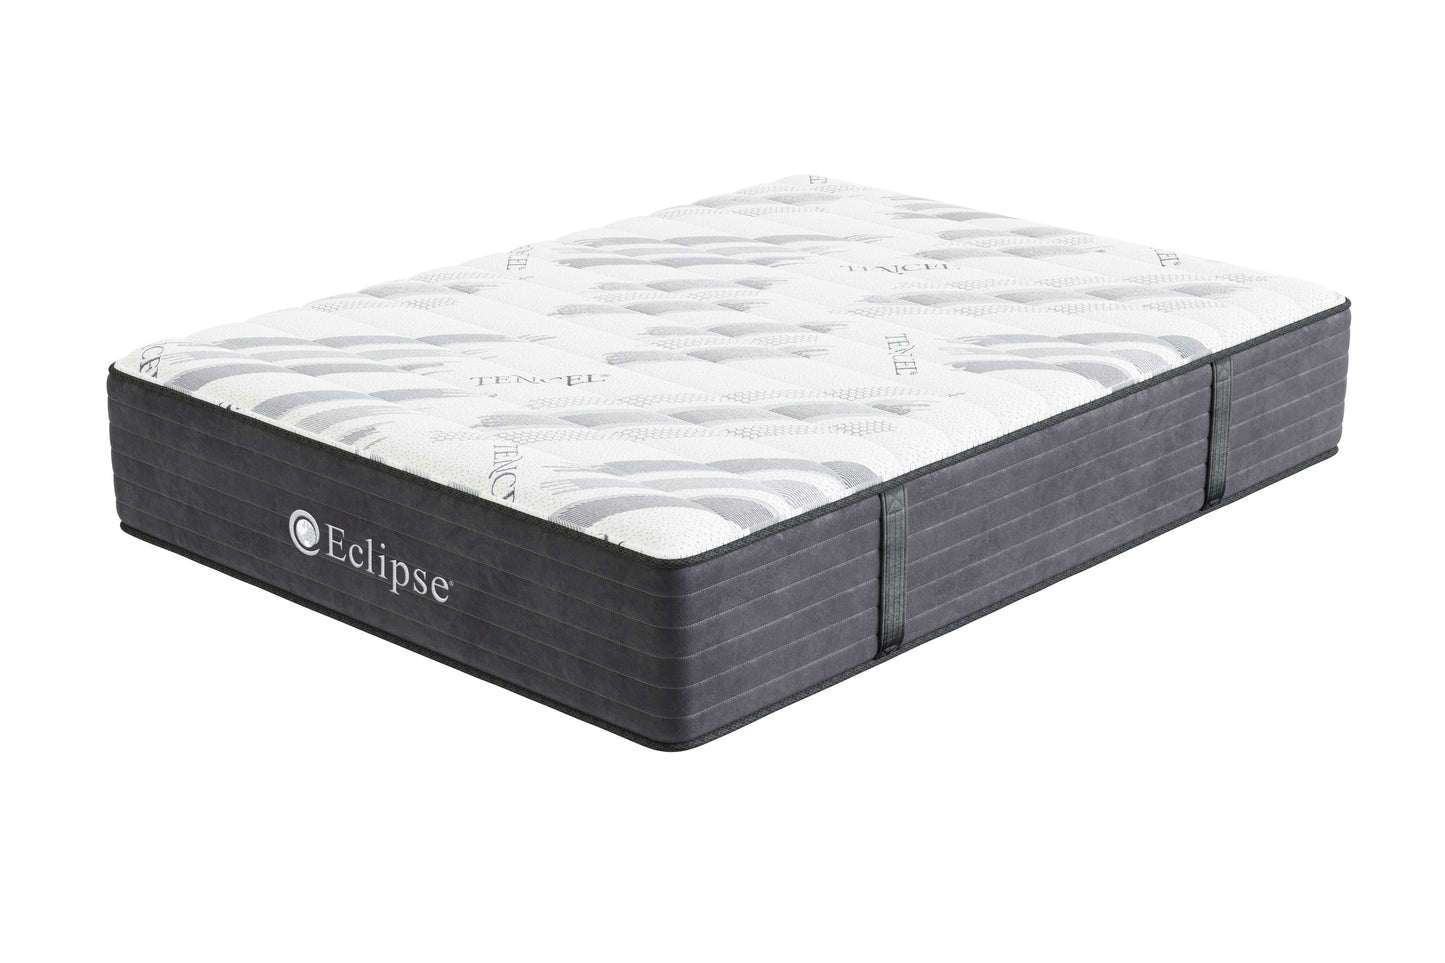 Eclipse Cares Collection Ease Hybrid 10" Firm Mattress